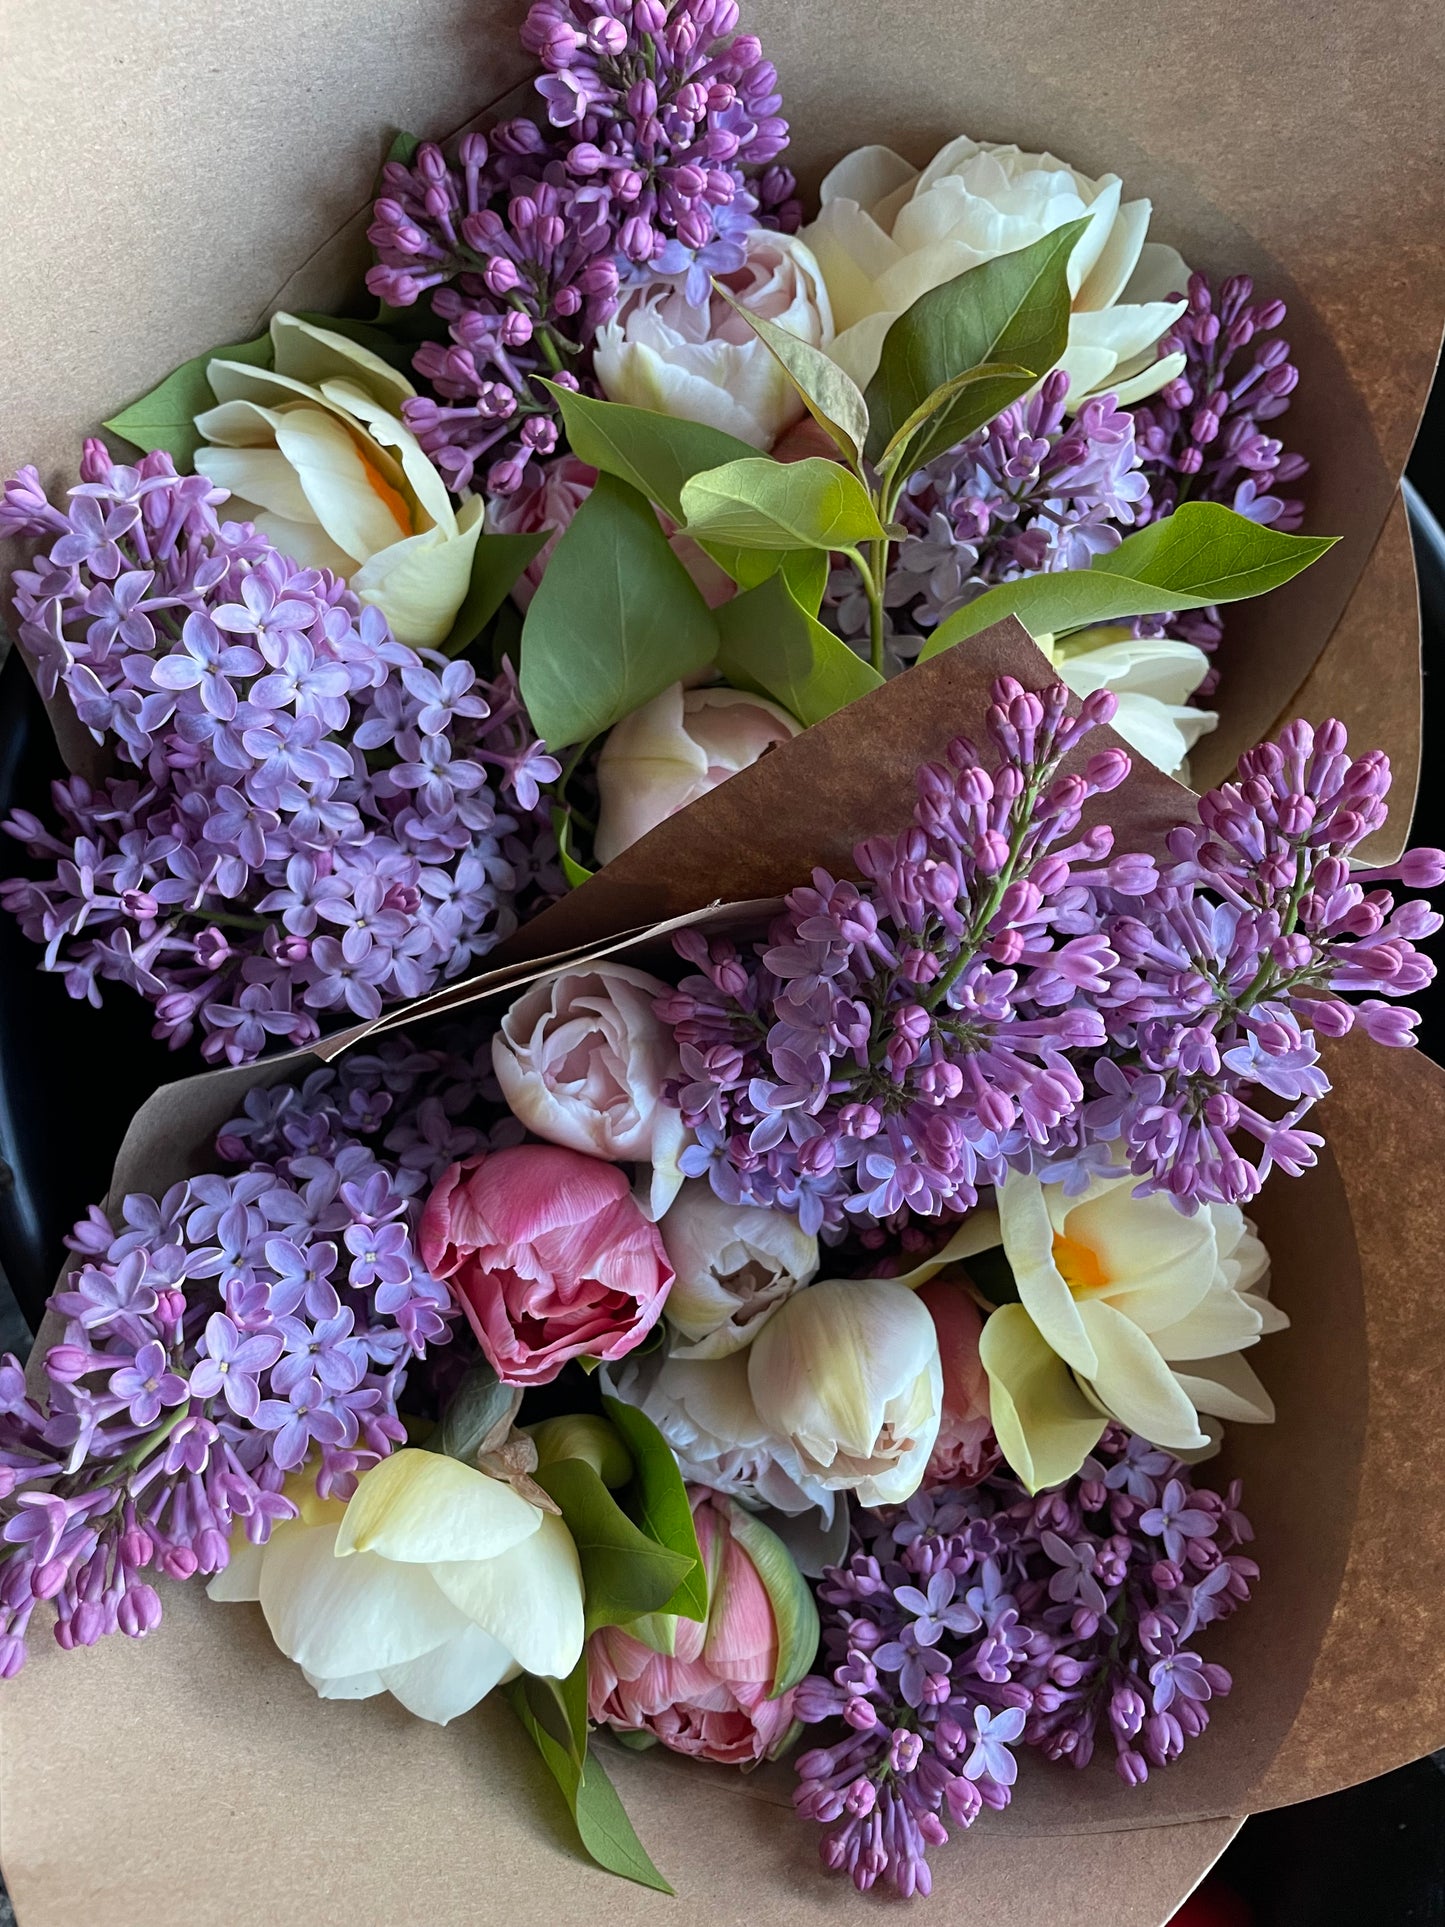 Flower Subscriptions - Pickup Only